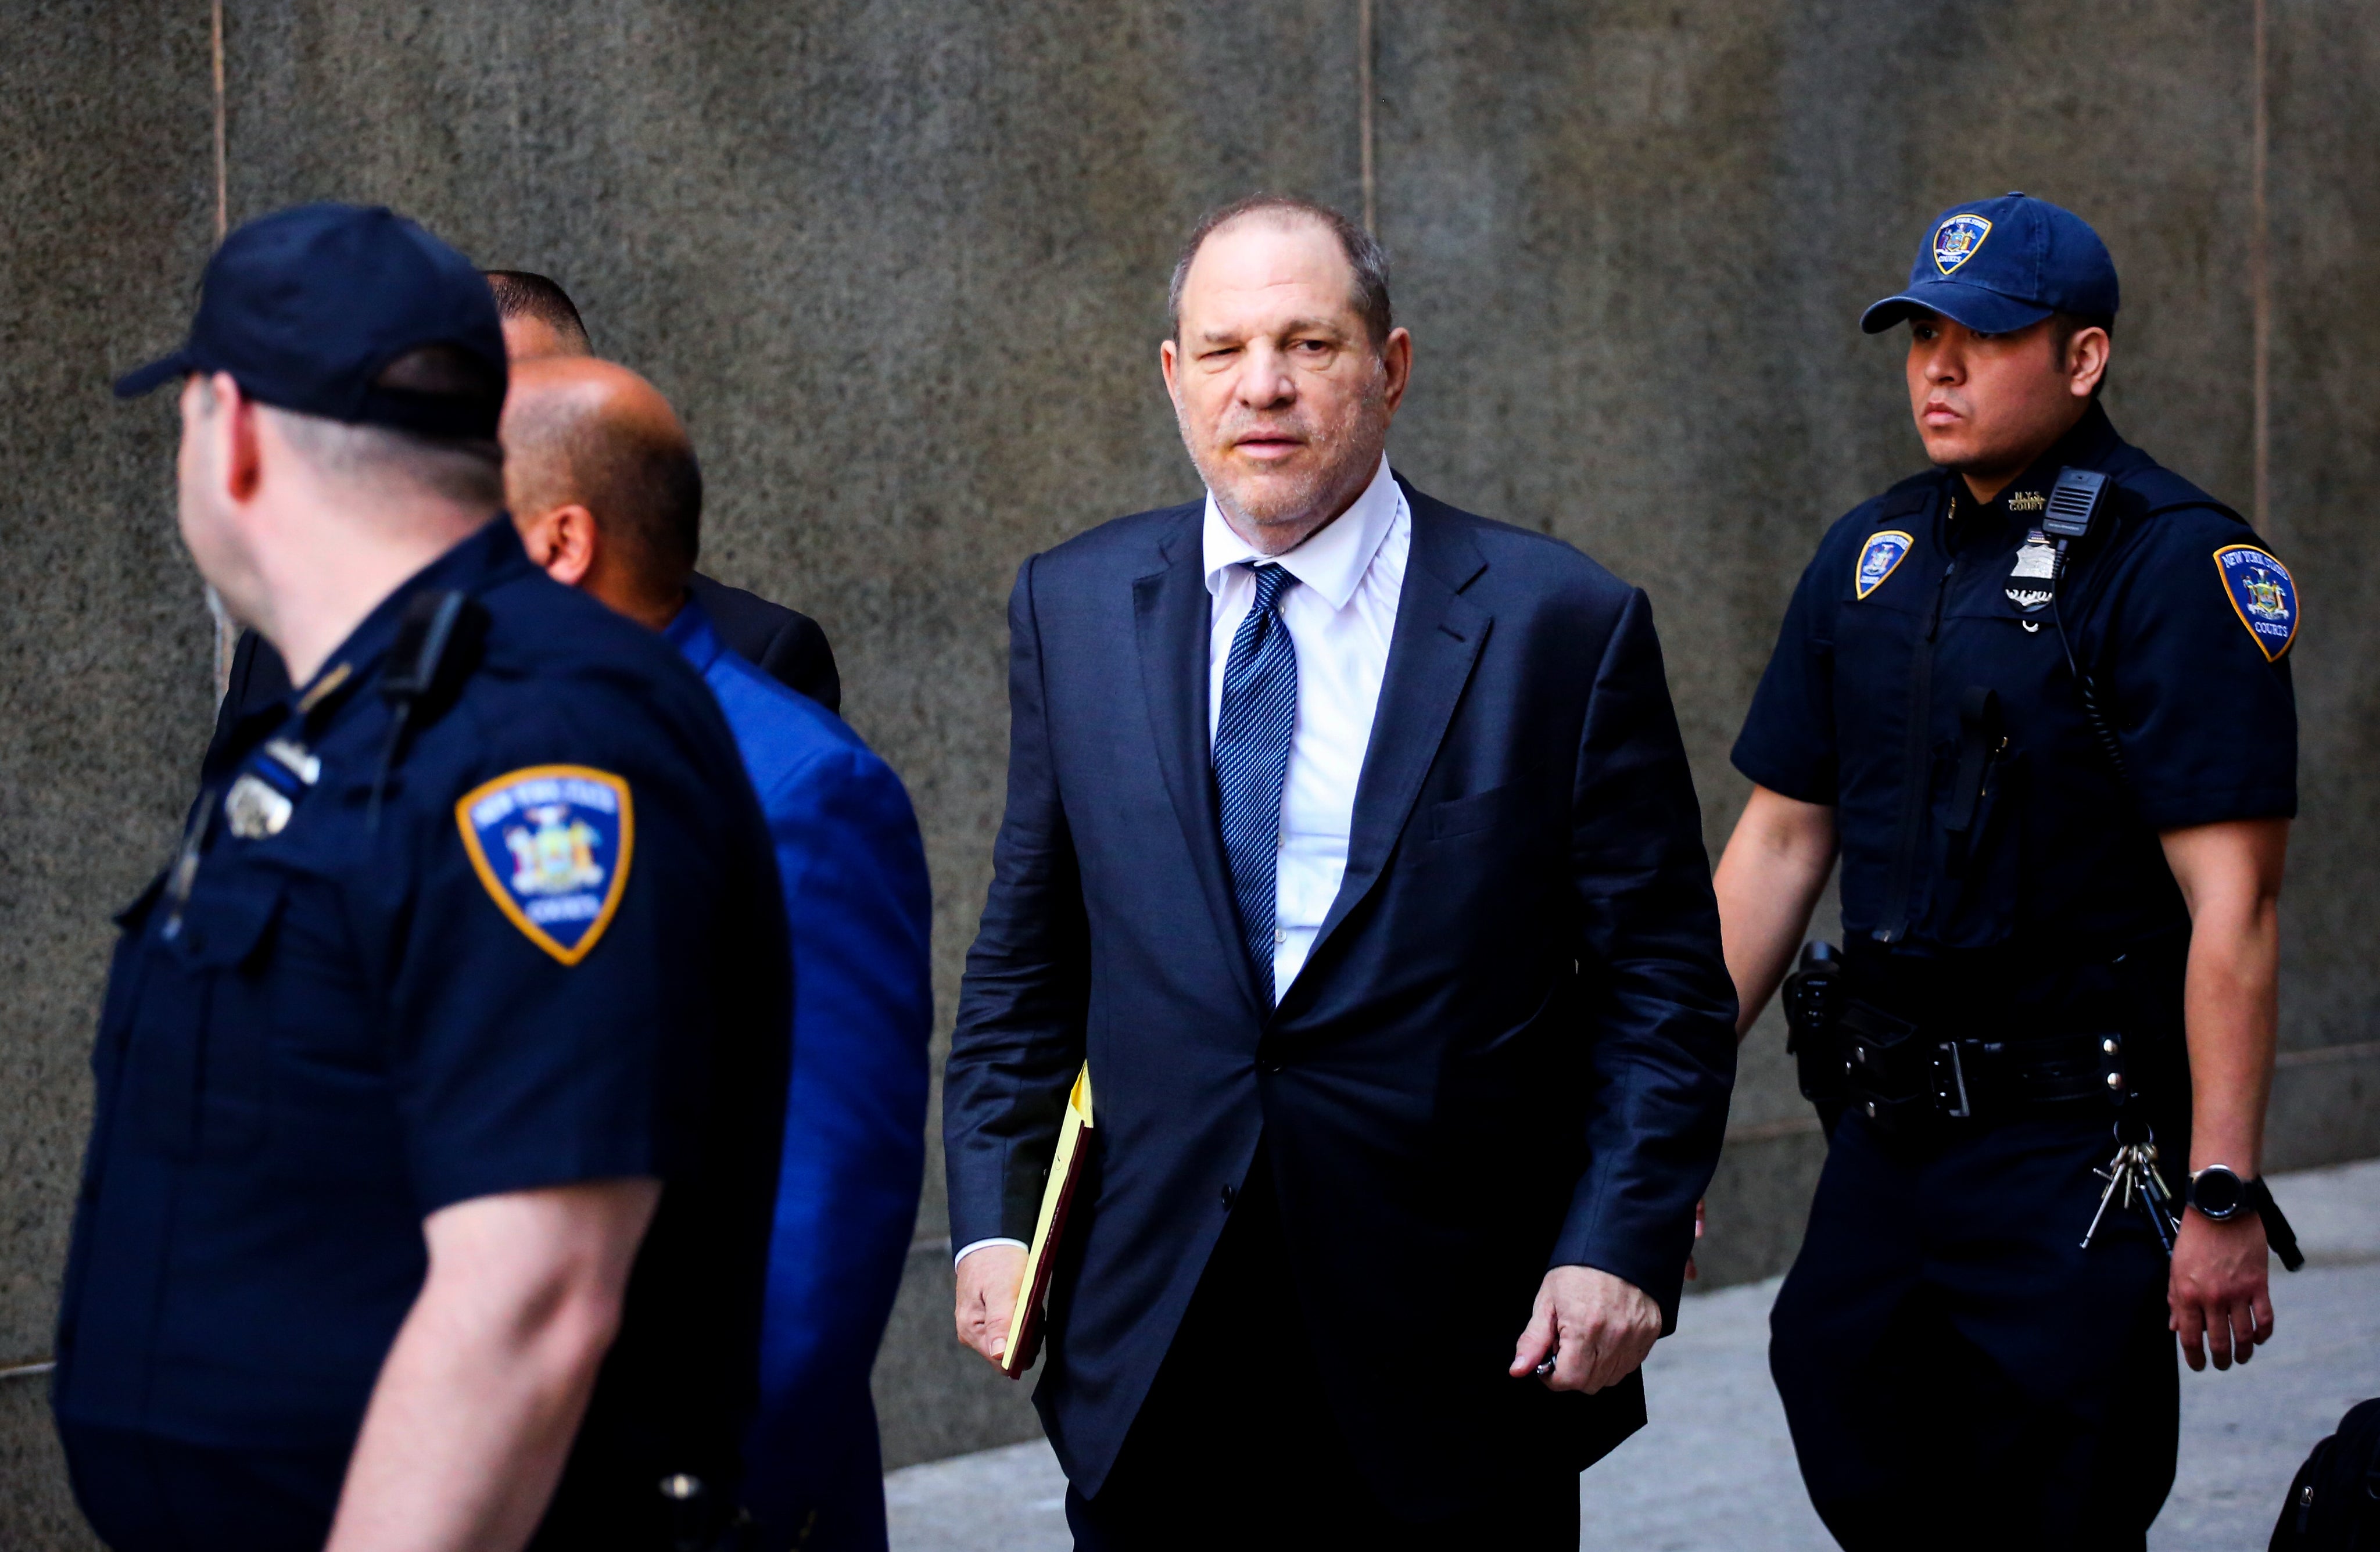 Movie producer Harvey Weinstein (center) leaves the courthouse after appearing in criminal court on sexual assault charges in July in New York City. In his first comments after the scandal broke, he said he was hoping for a "second chance" and "we all make mistakes."